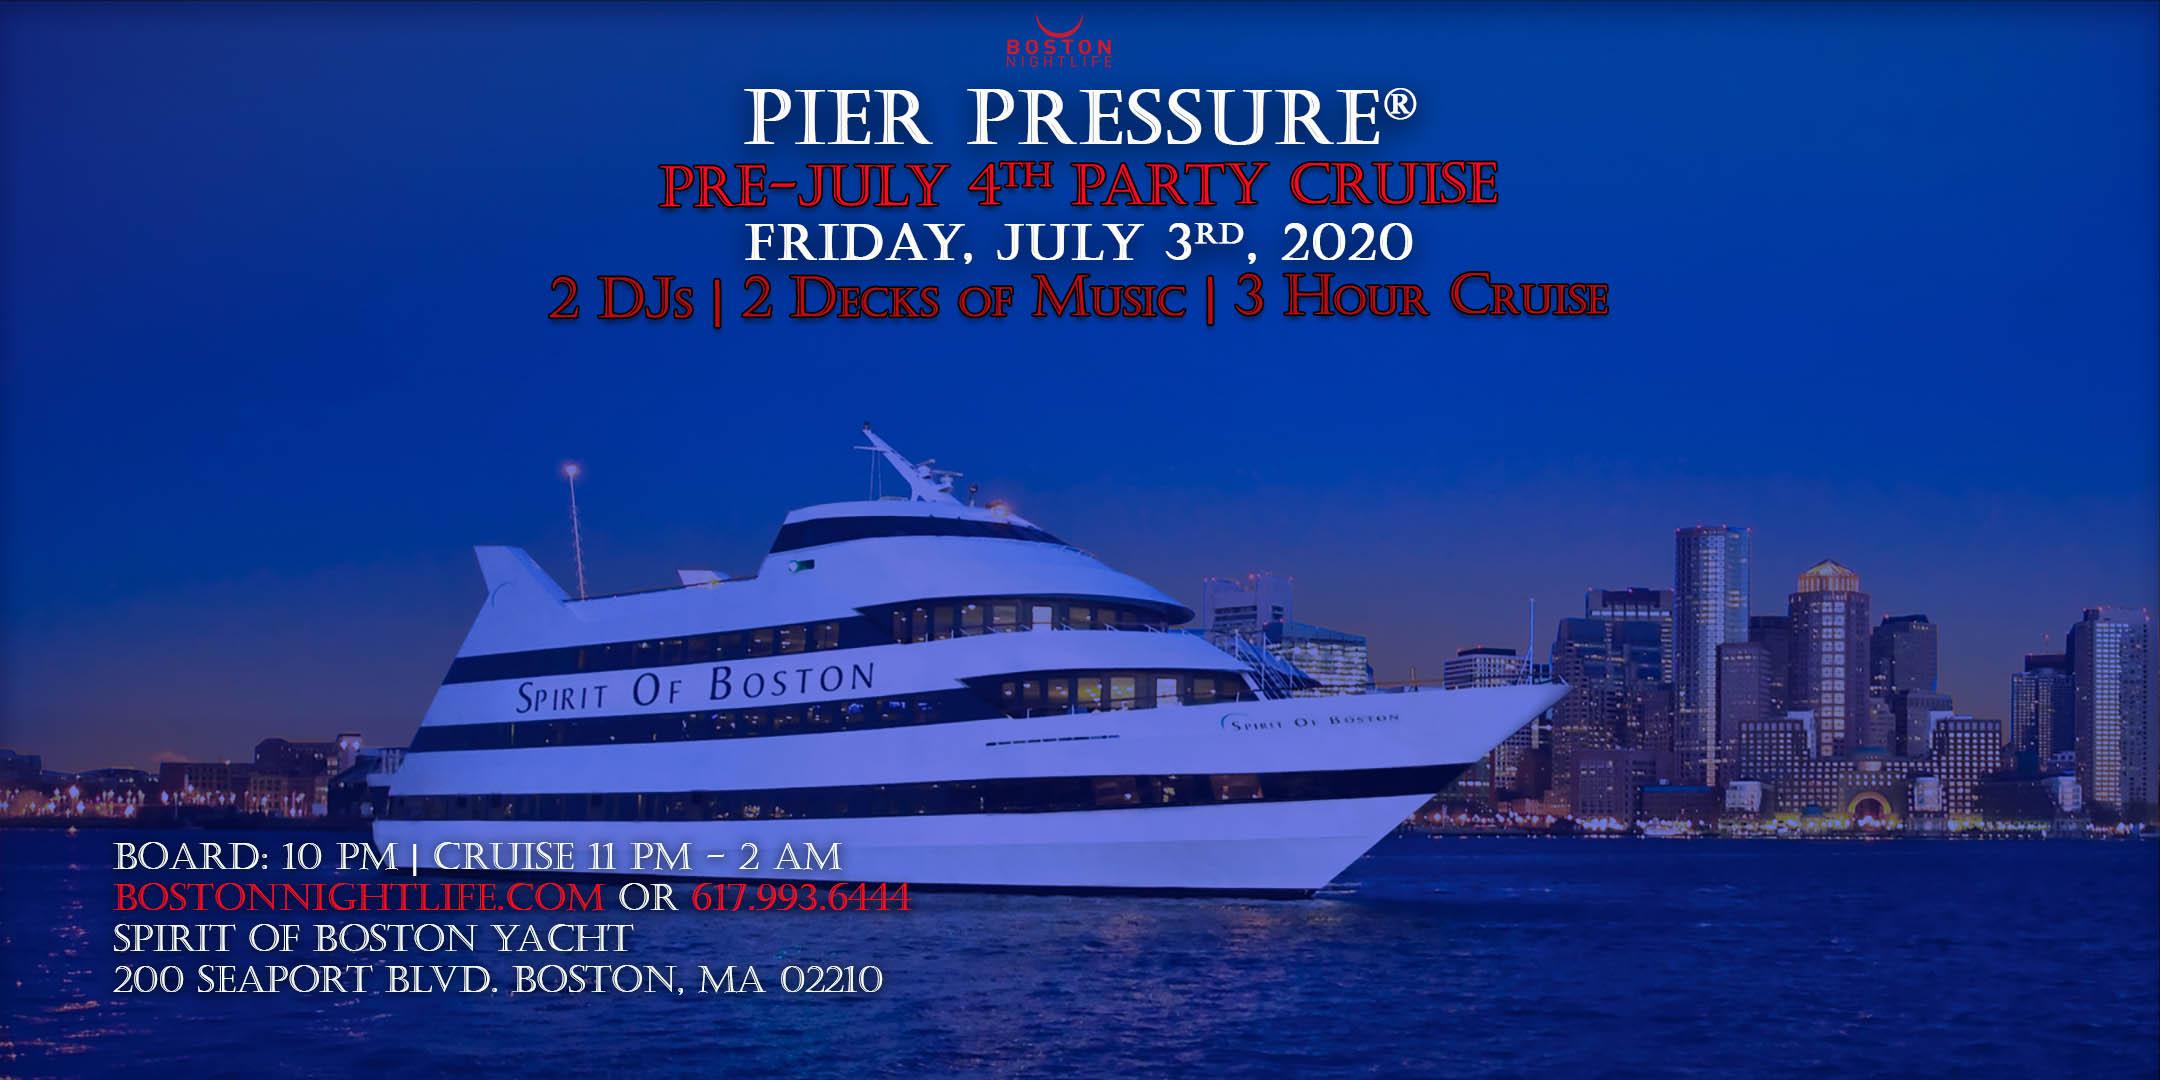 Special Boston Pier Pressure Pre-July 4th Yacht Party